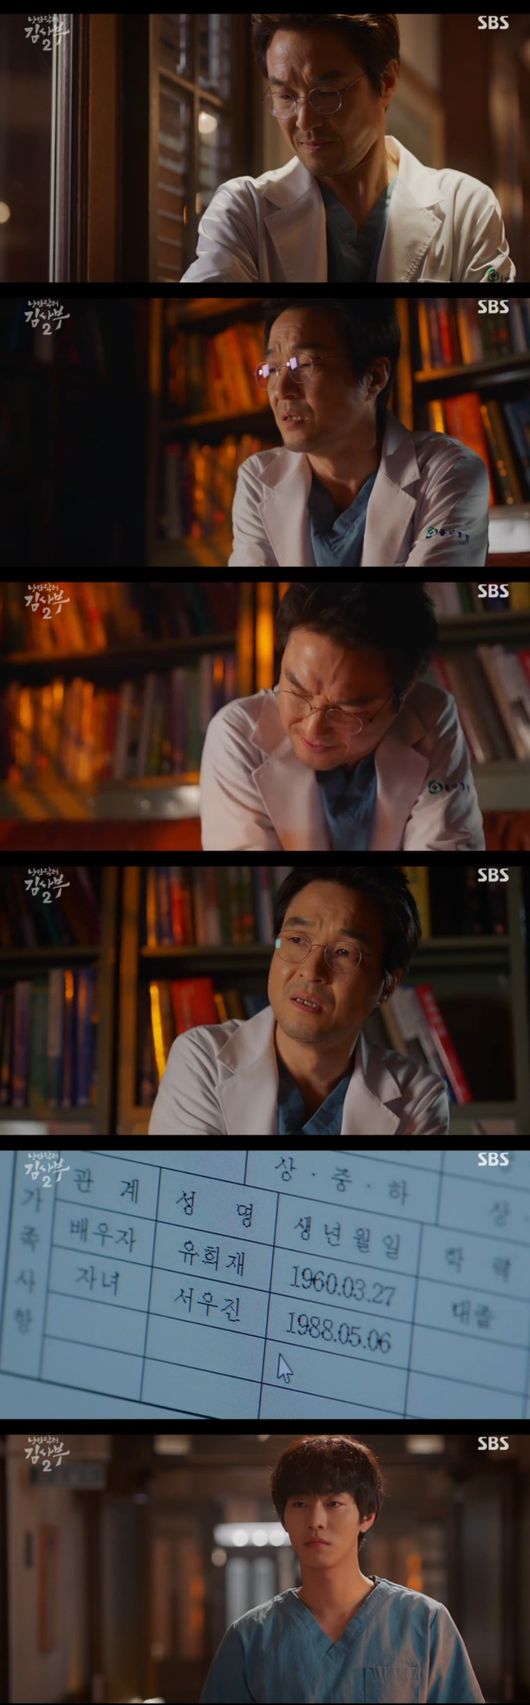 Han Suk-kyu was hit by Danger with an arm abnormality, with Ahn Hyo-seop kissing Lee Sung-kyung in Romantic Doctor Kim Sabu 2.On the 3rd SBS Monday Drama Romantic Doctor Kim Sabu Season 2, Woojin (Ahn Hyo-seop) gave a surprise kiss to Eun Jae (Lee Sung-kyung), who was worried about his unfortunate situation.Eunjae recalled that Woojin had kissed him in the past when he was a college student, saying, It is a way to set your head in a room. Woojin told Eunjae, Is it definitely set this time?, and Eun-jae slapped him, saying, This is crazy.Back to the present, Eun-jae pushed Woojin, who stole his lips; when the silver was embarrassed and asked why, Woojin said, I dont know. Are you asking to check?And when I get serious, I have no answer and no fun. He said, So do not feel sick about others work, I am confused.Yang Ho-joon (Ko Sang-ho), who tried to fire Eun-jae, witnessed this.Bae Moon-jung (Shin Dong-wook) continued to search for Woojins articles in the past, and then visited Han Suk-kyu, but he kept quiet.In the meantime, while opening the door, Kim felt an abnormal signal on his right arm and felt the Danger of his life.Romantic Doctor Kim Sabu 2 captures the broadcast screen